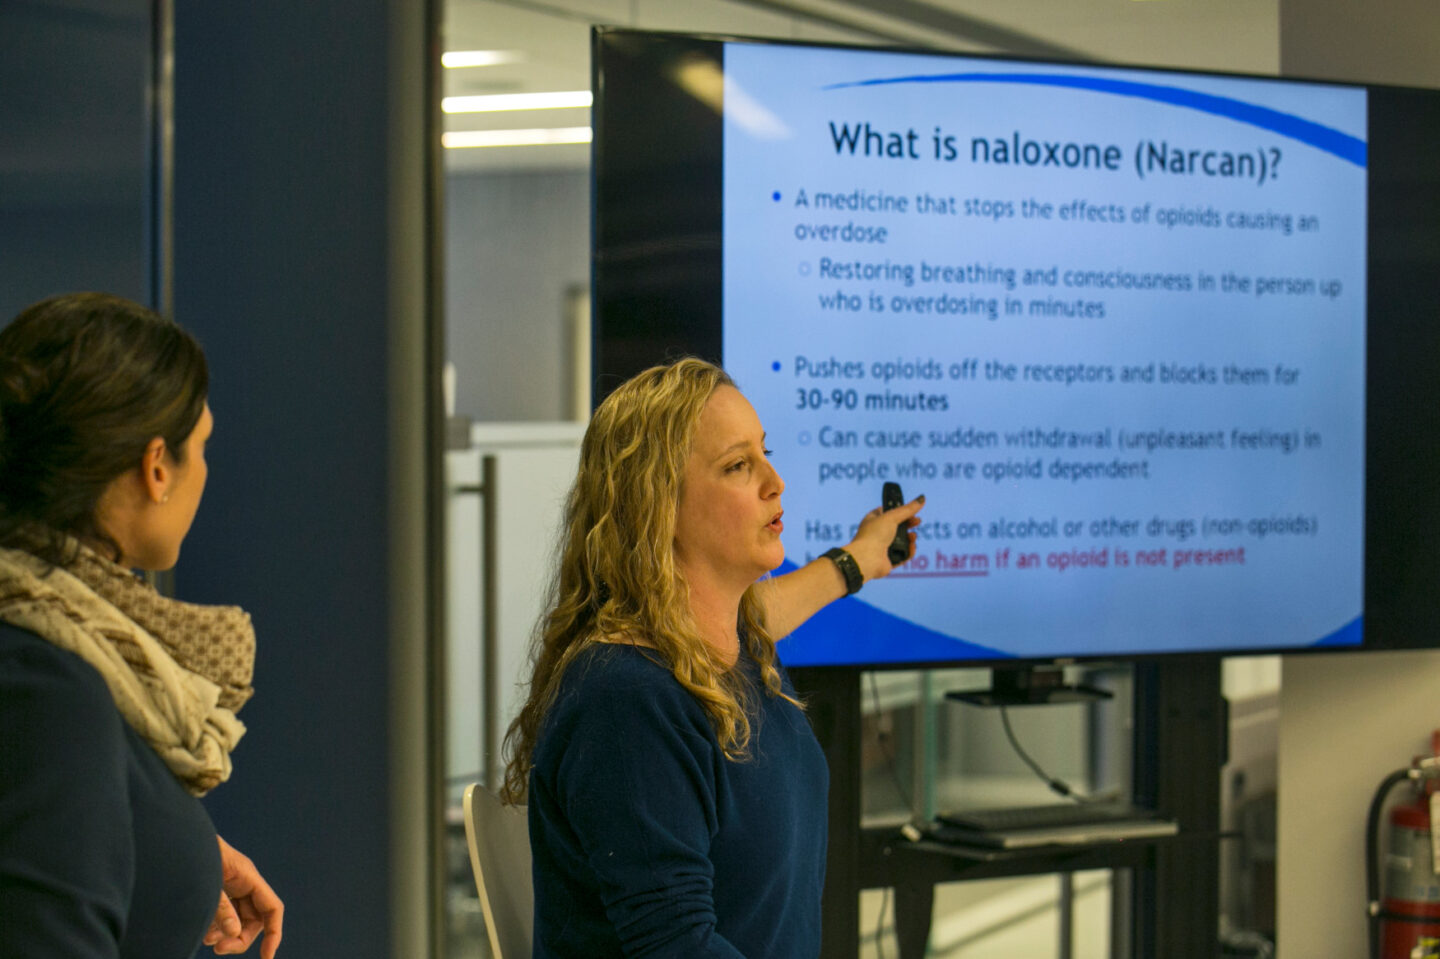 An individual presents in front of a screen that says "What is naloxone (Narcan)?"